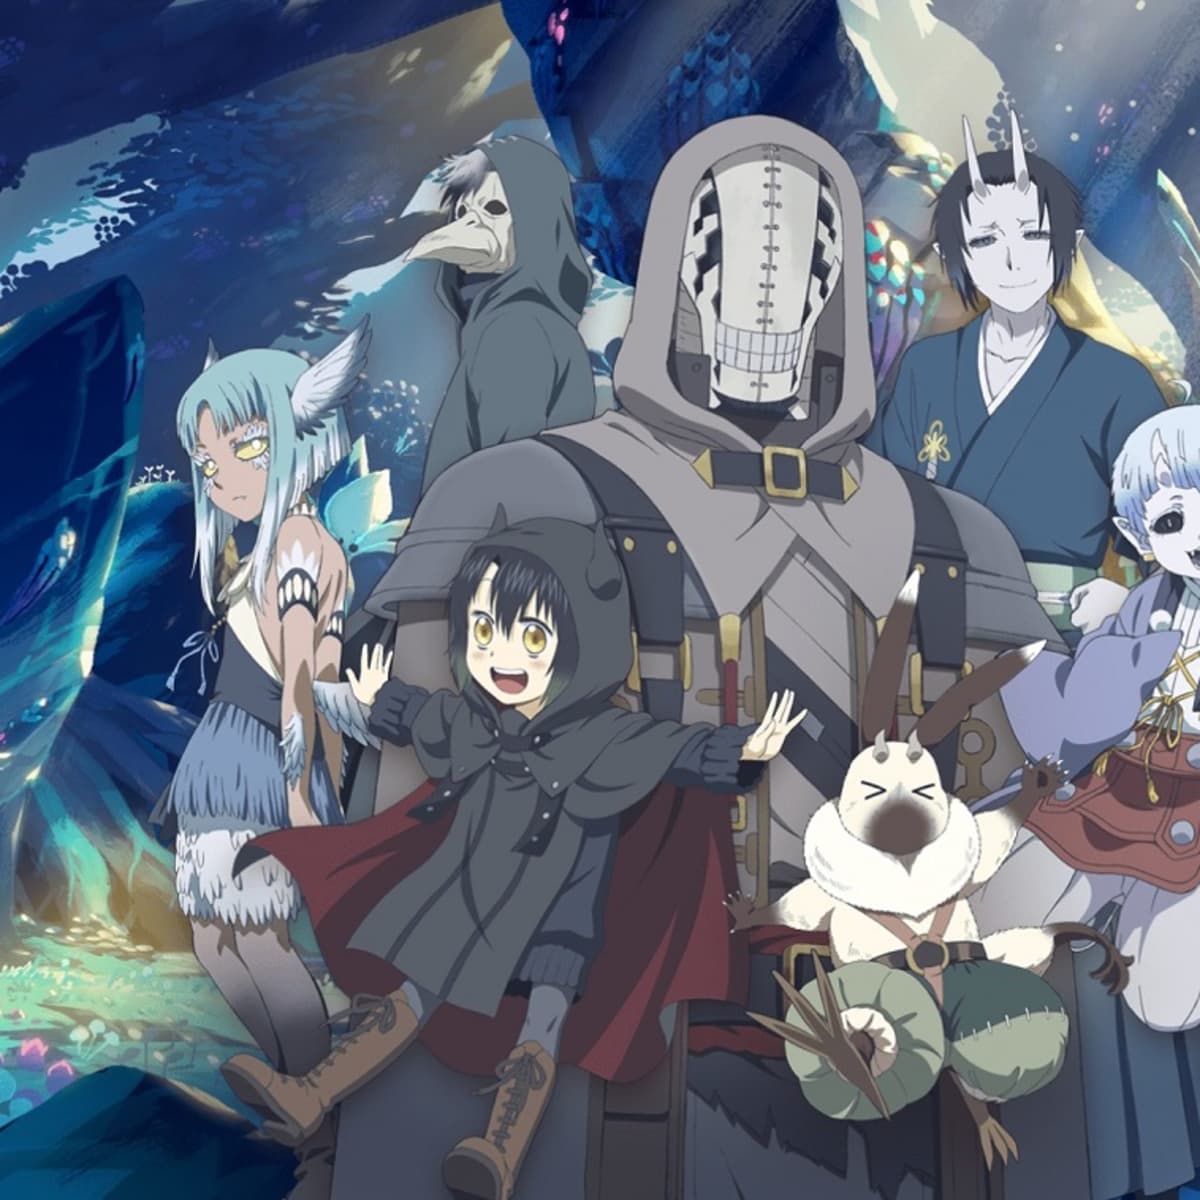 Finding Family in Somali to Mori no Kamisama (Somali and the Forest Spirit)